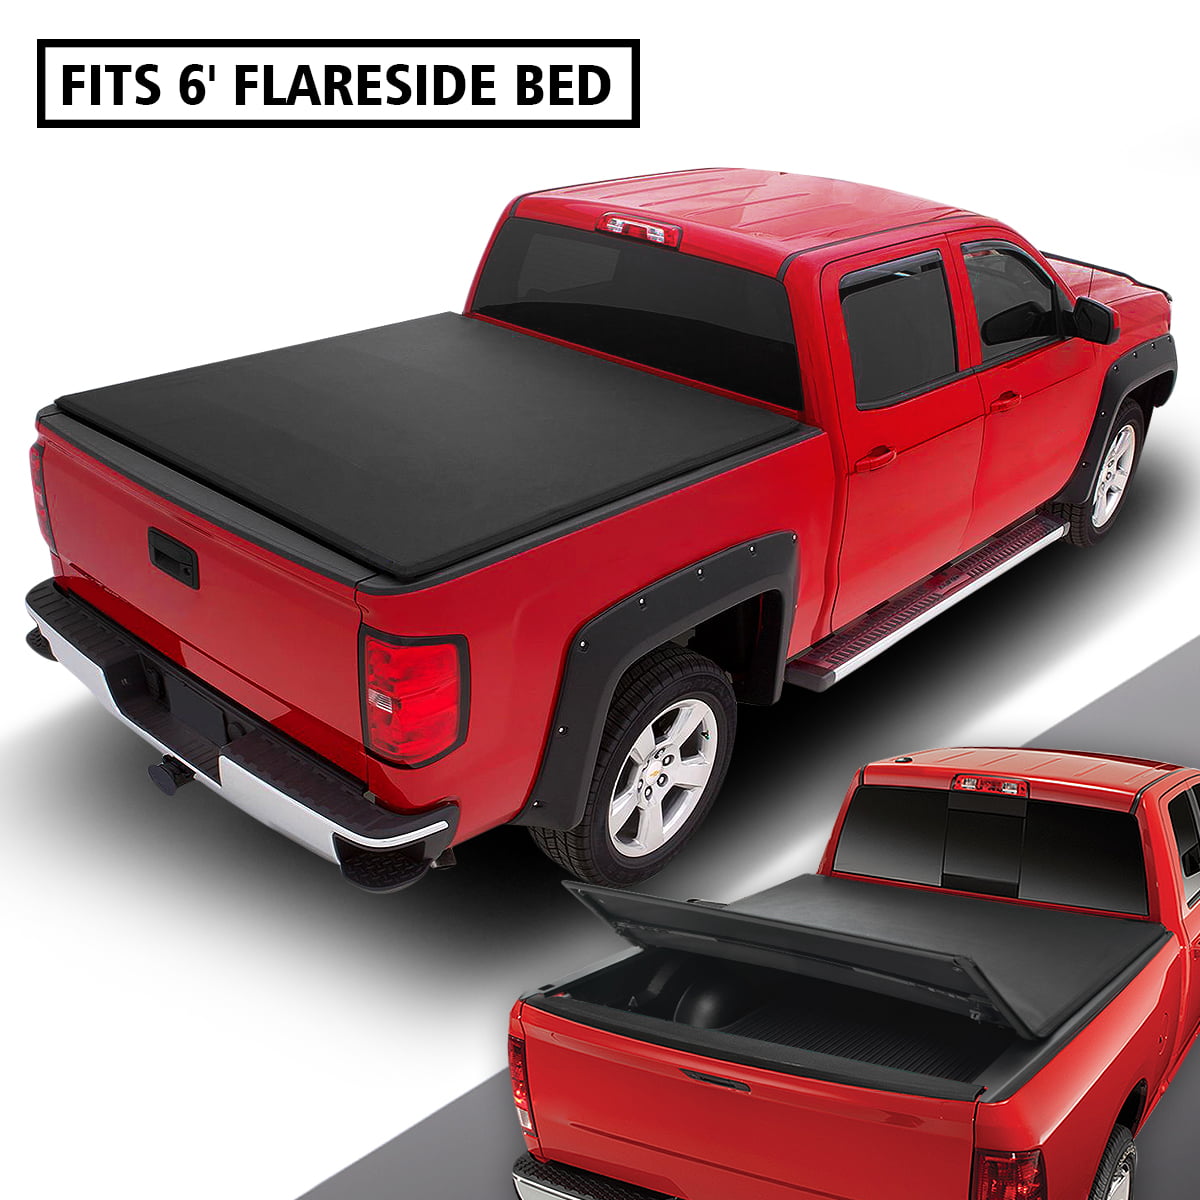 2004 ford ranger bed cover